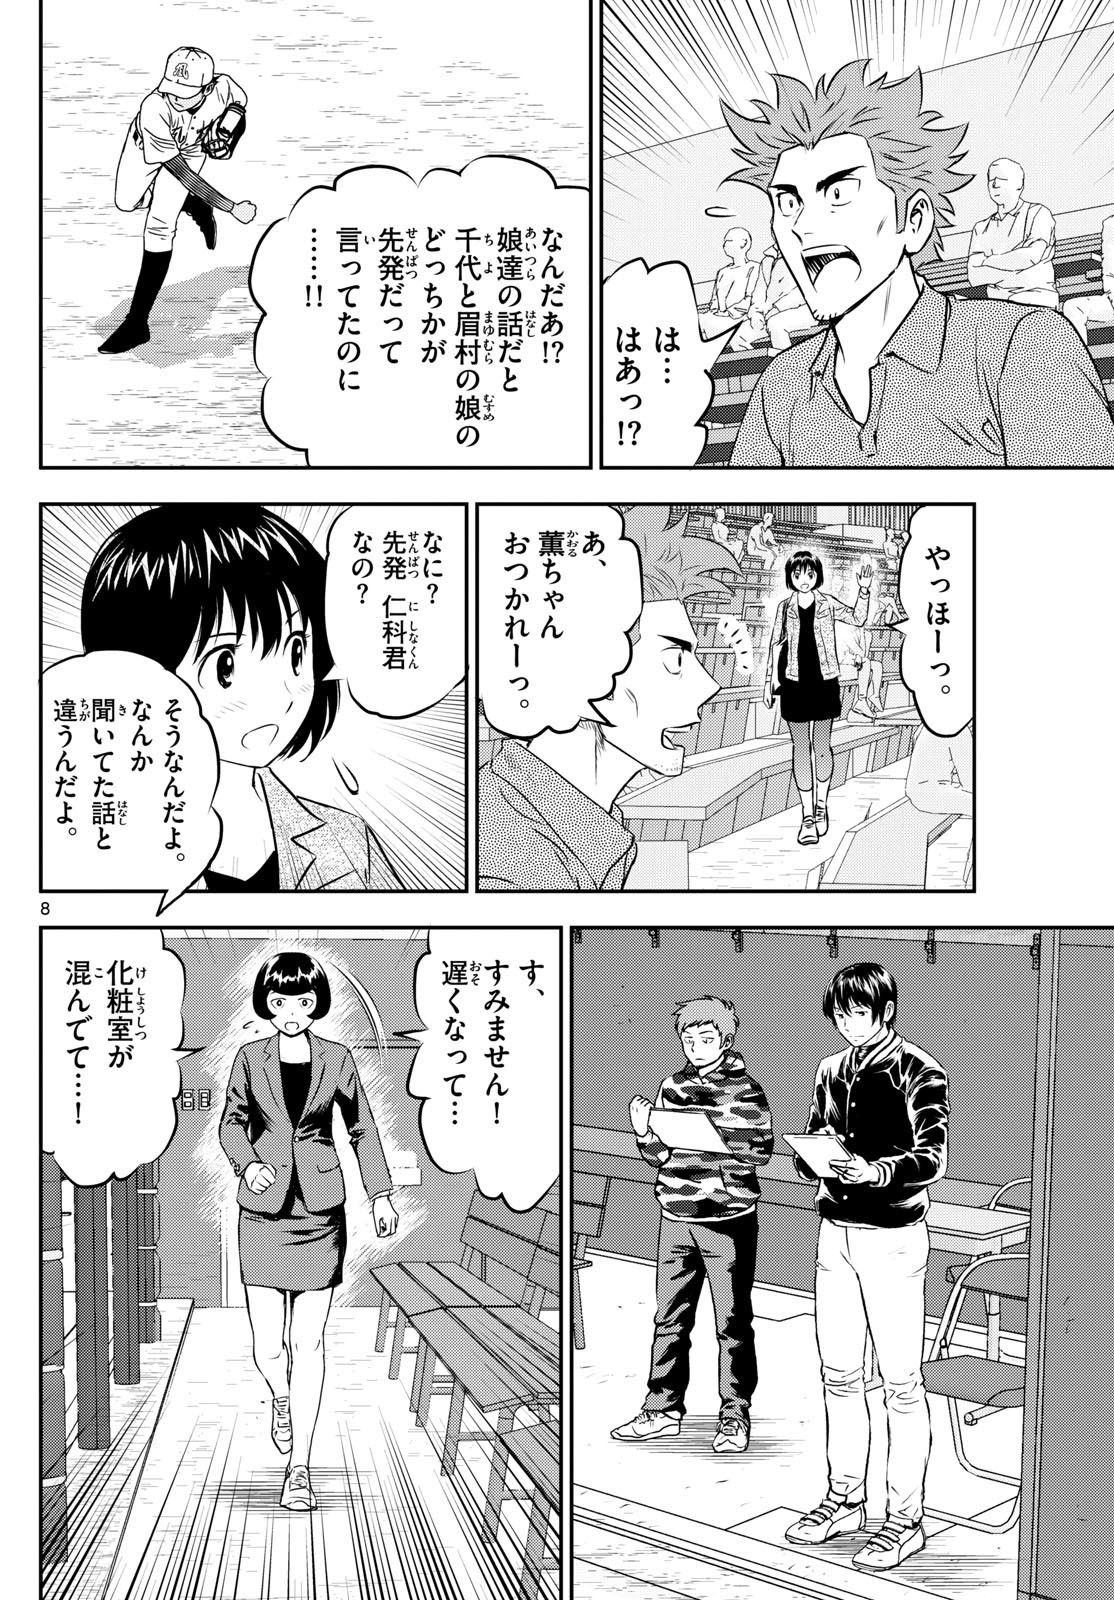 Major 2nd - メジャーセカンド - Chapter 283 - Page 8